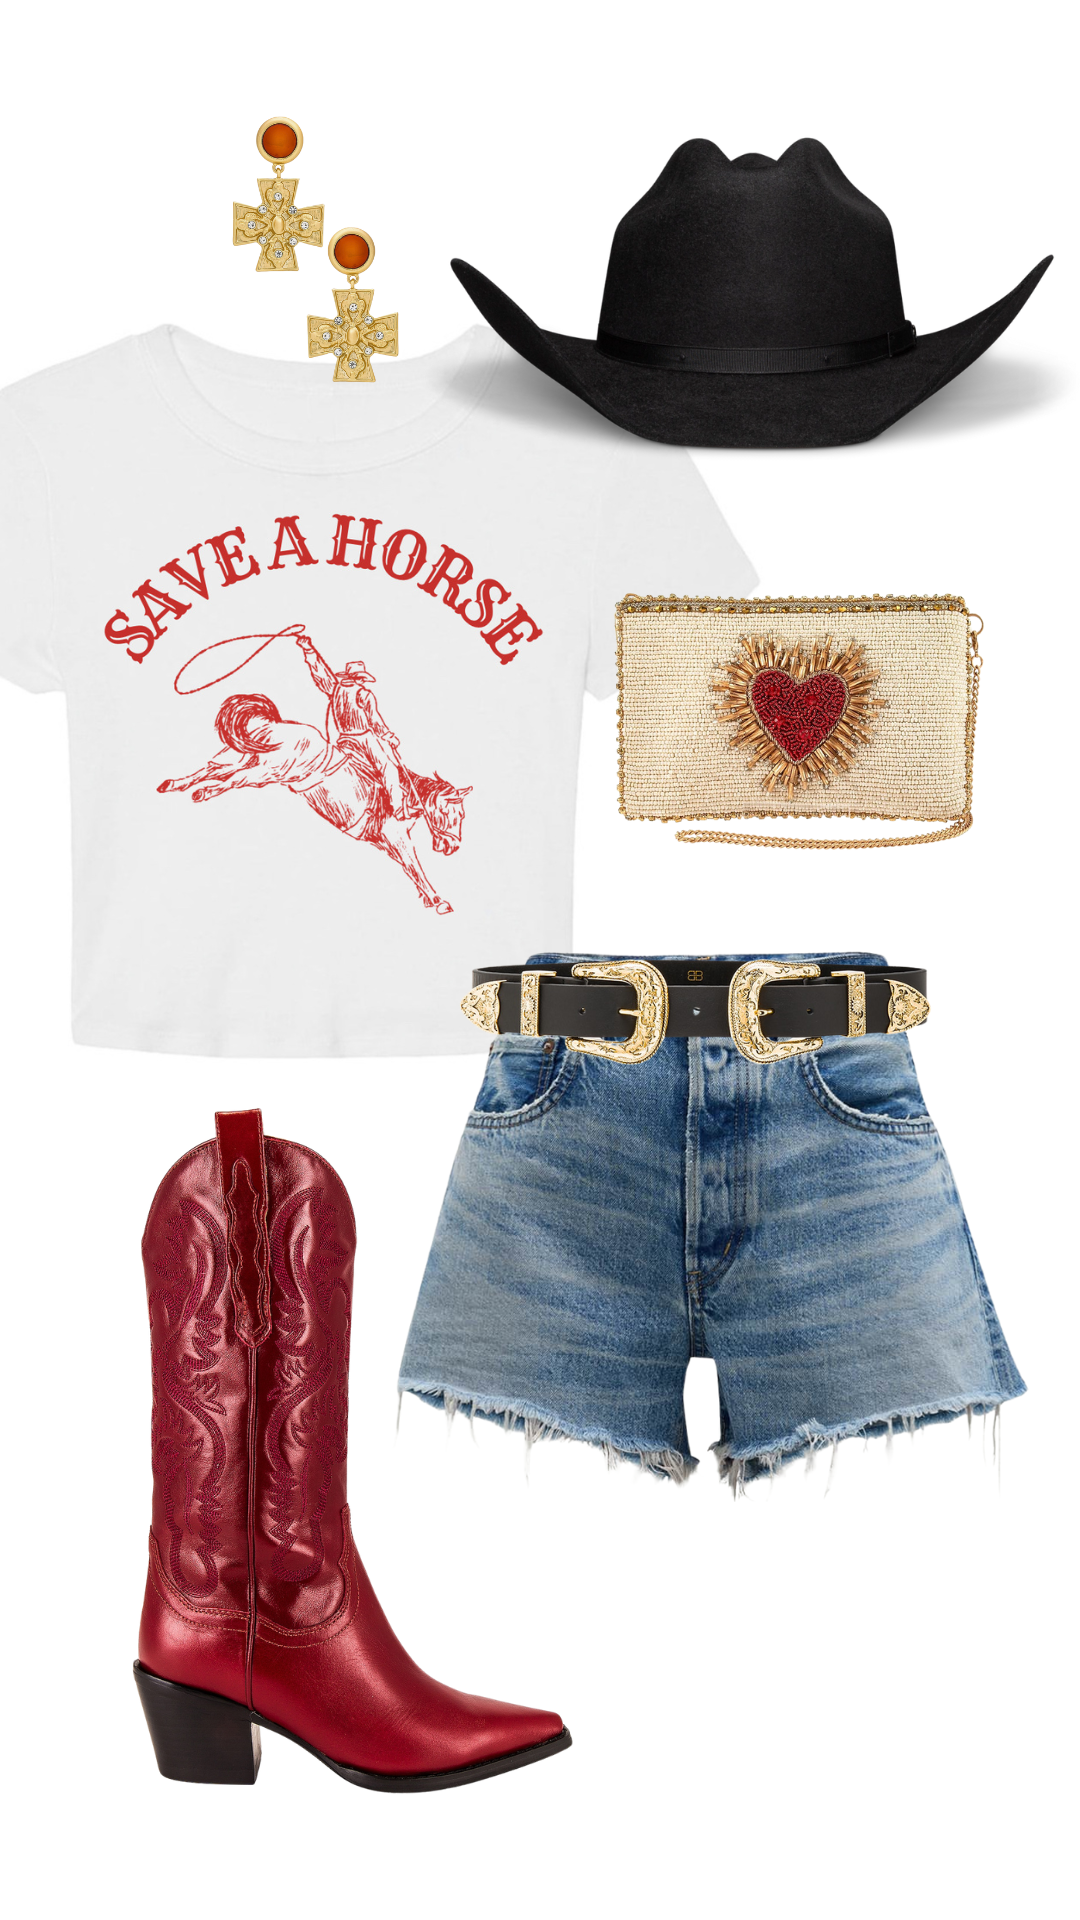 Save A Horse Baby Tee